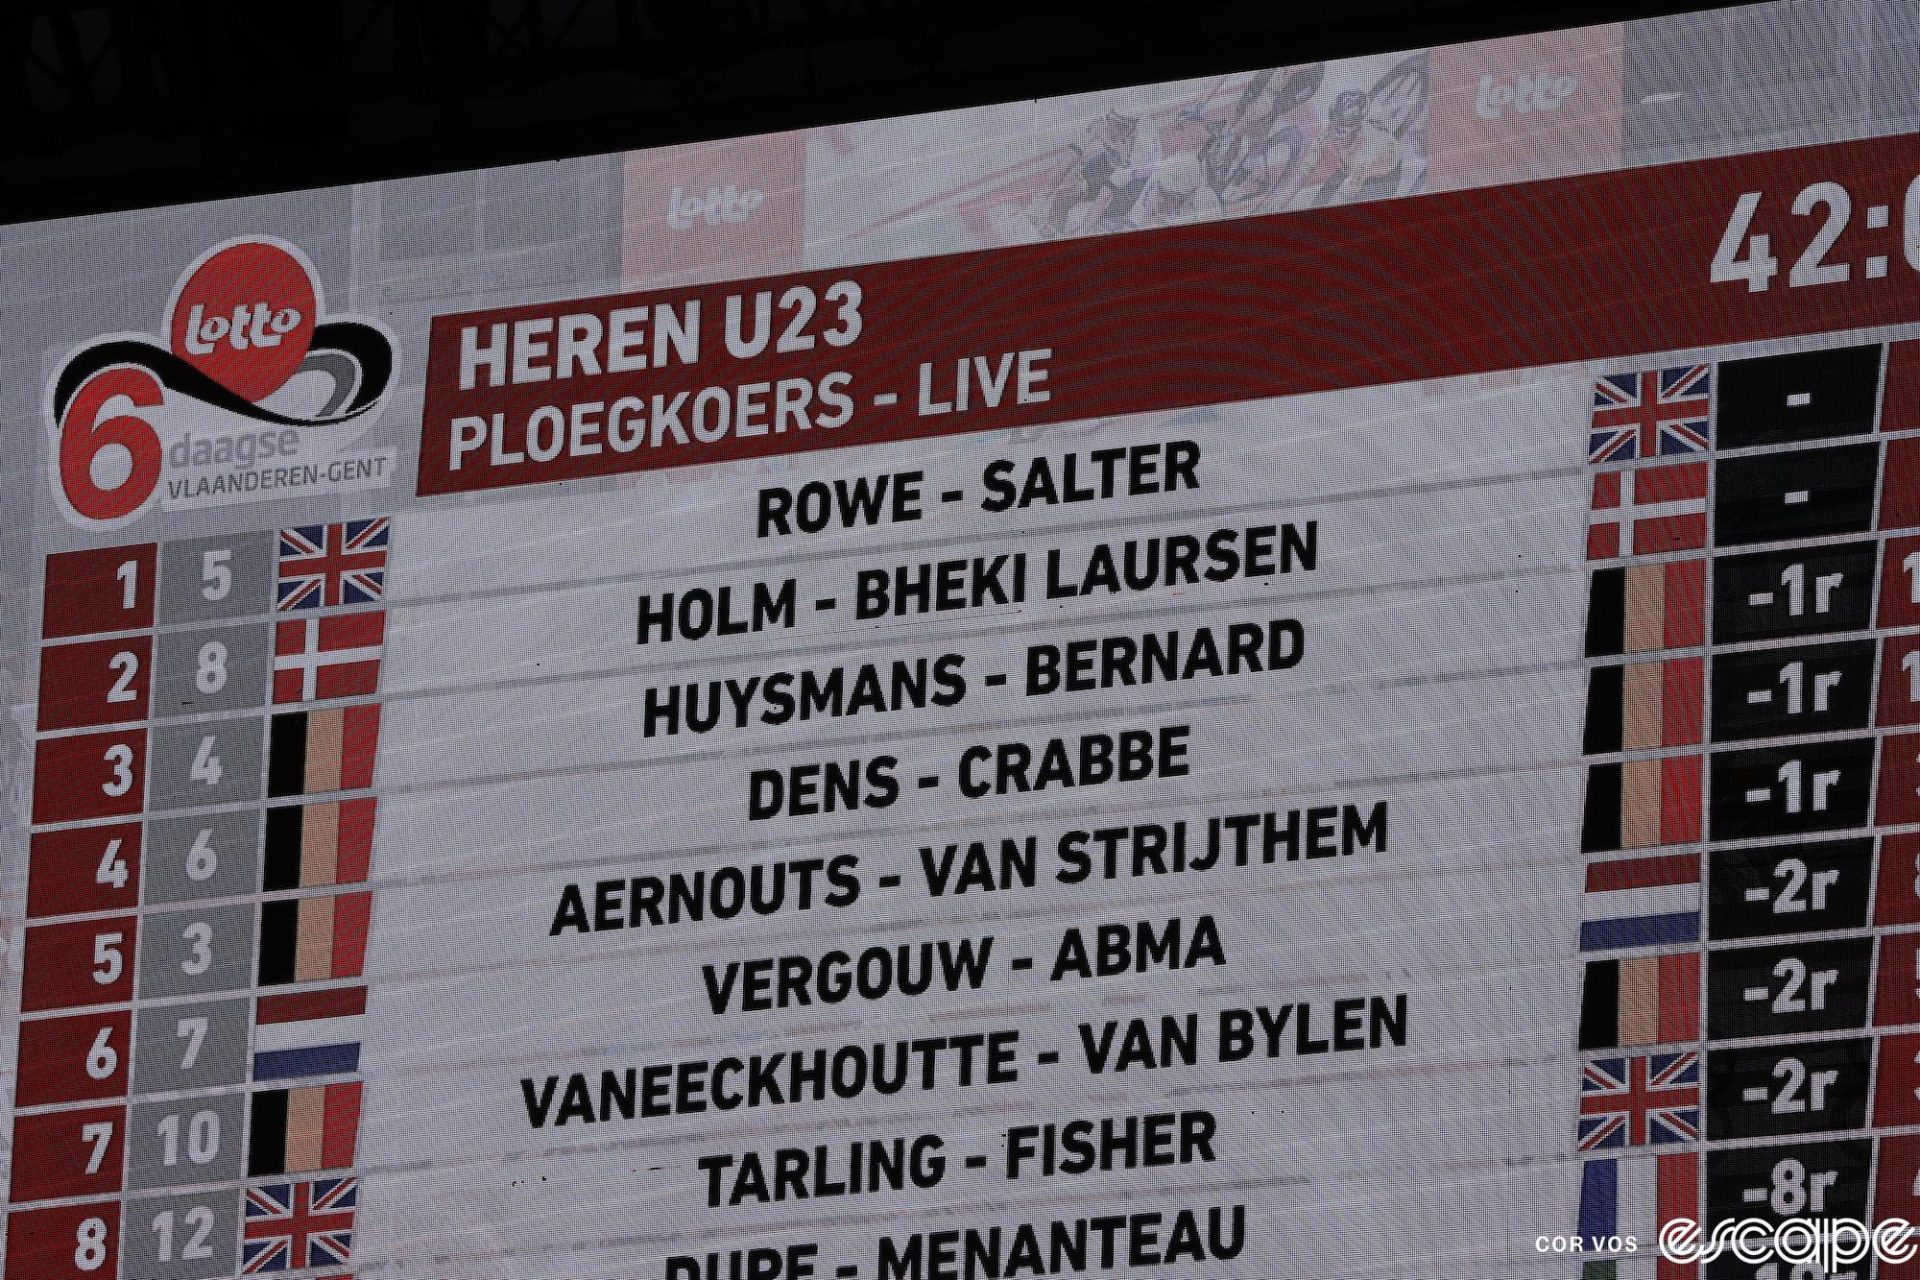 The scoreboard for the U23 field at the Gent Six Day, showing which riders are 1, 2, and 8 laps down.